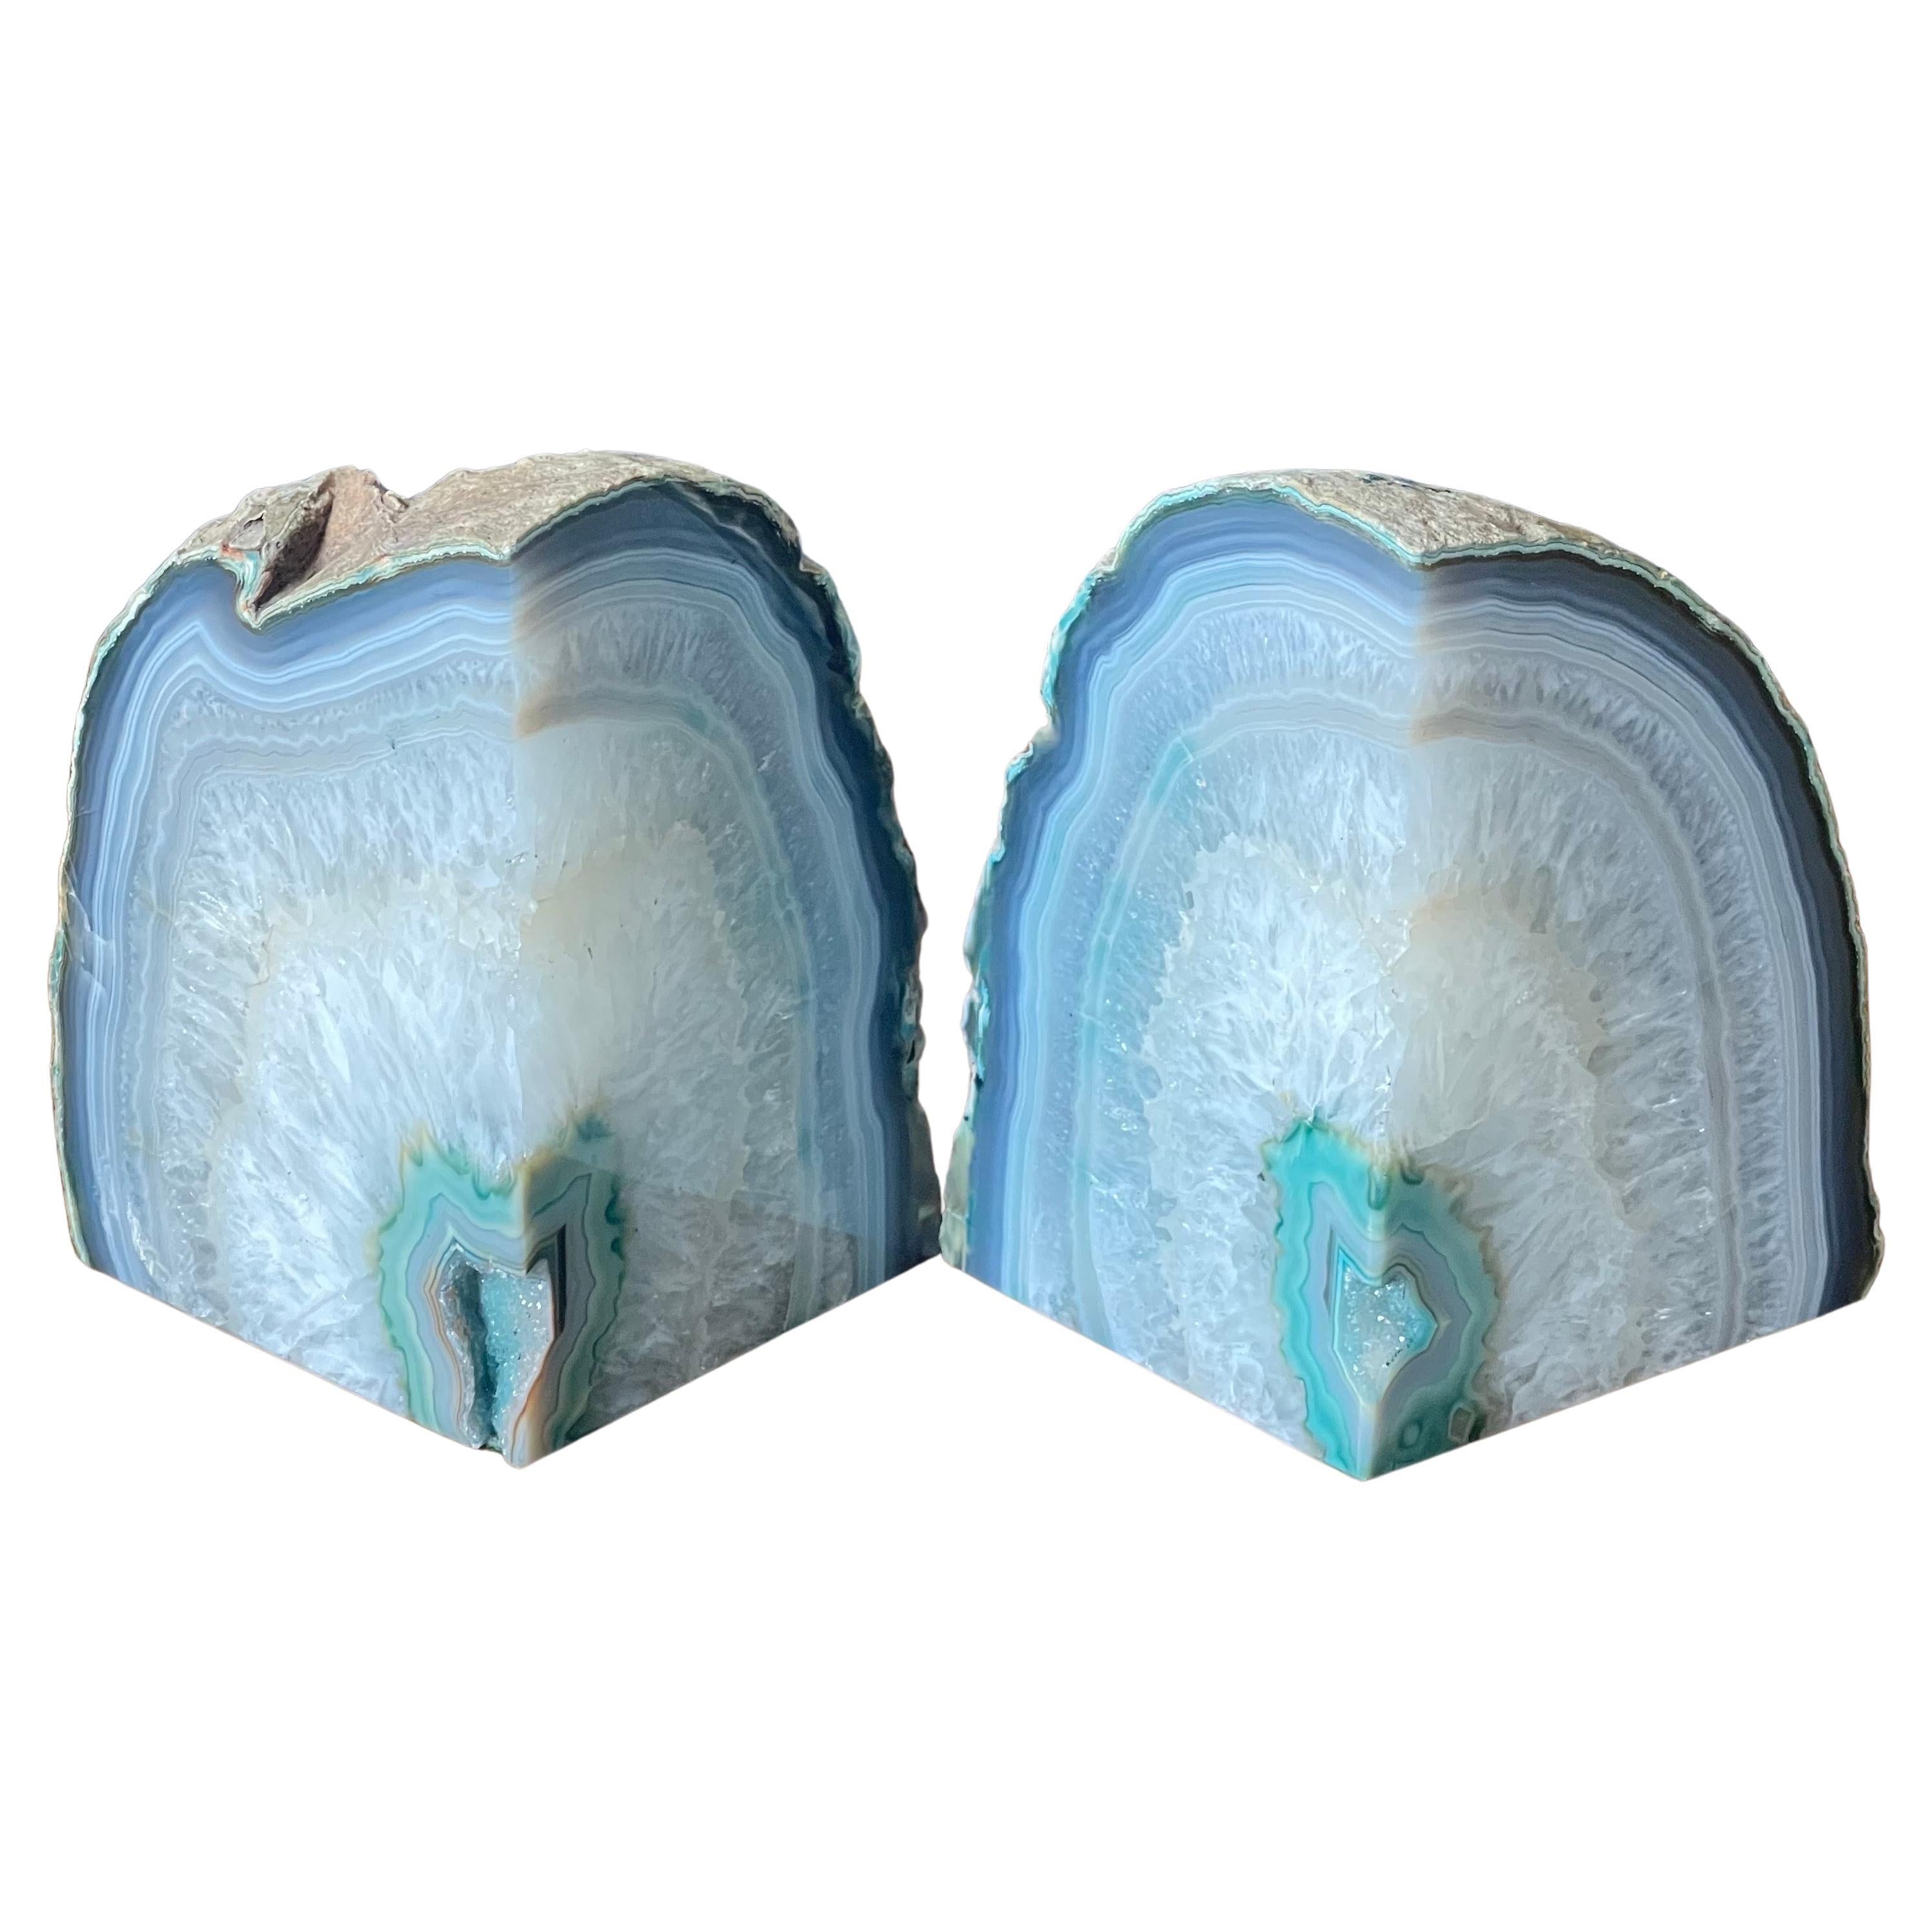 Versatile set of teal colored geode bookends, circa 1980s. The set is in very good vintage condition with no chips or cracks and measures 7.5